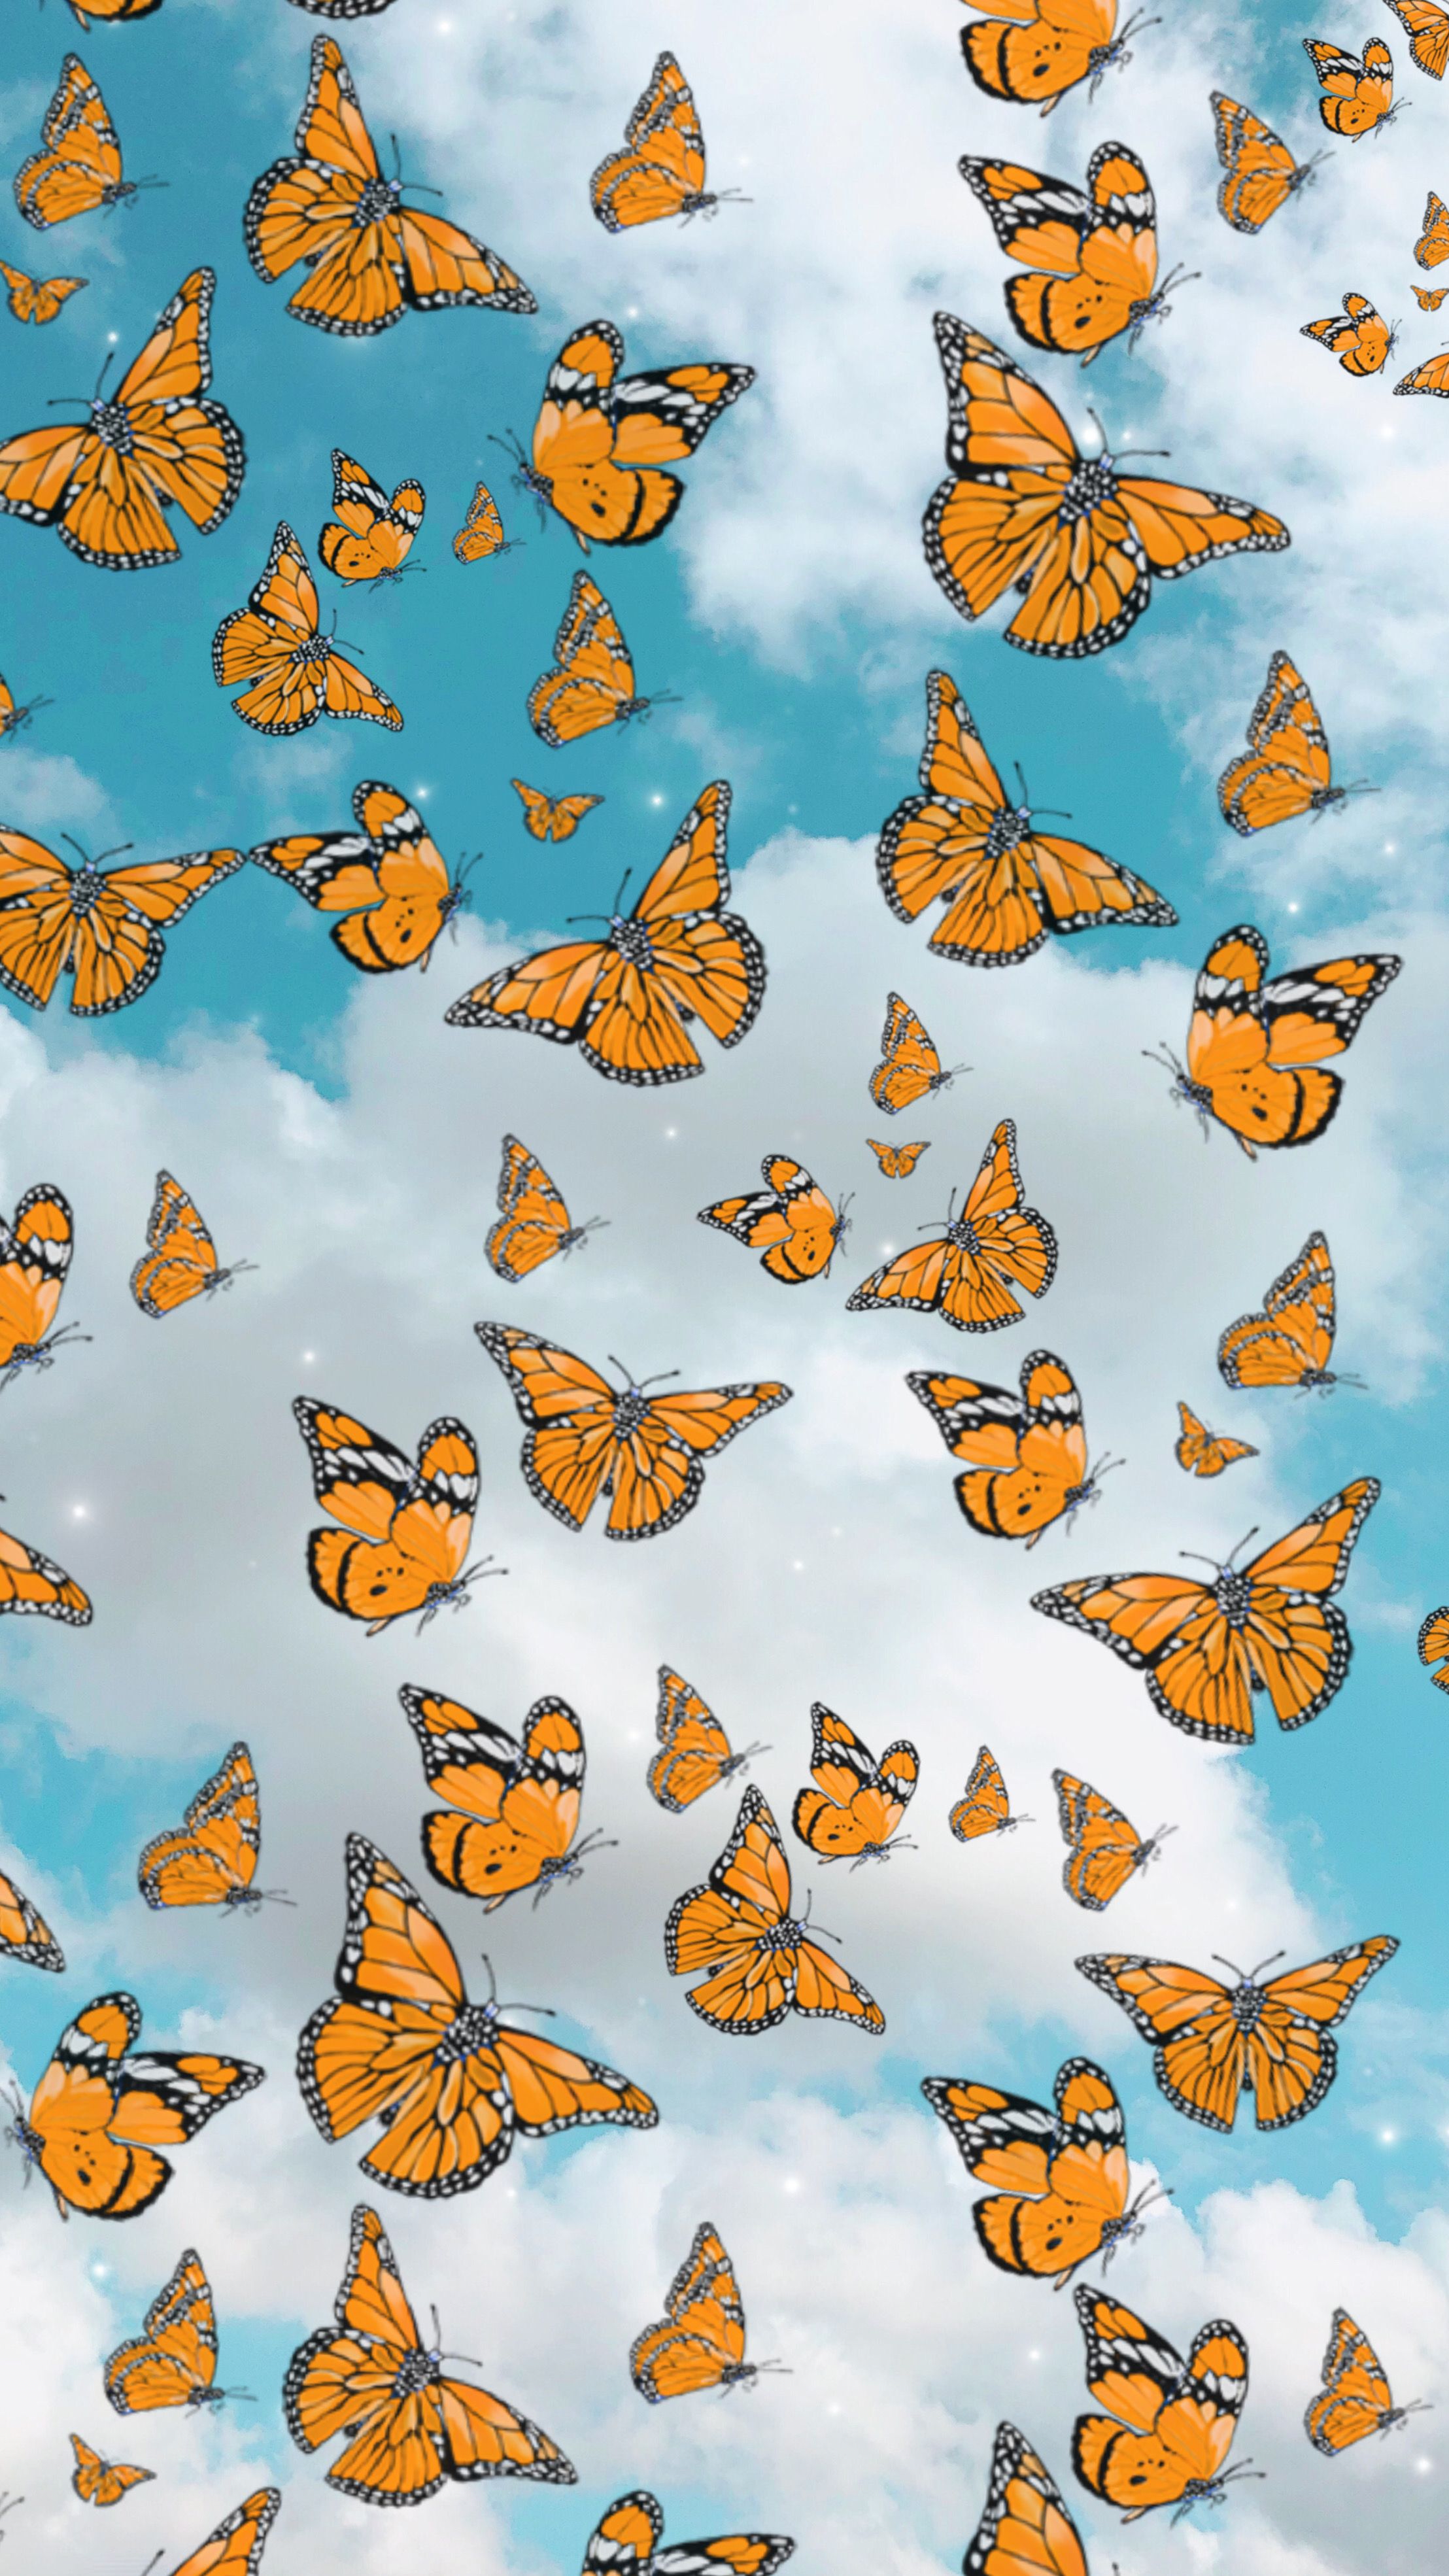 Orange Butterfly Iphone Wallpapers